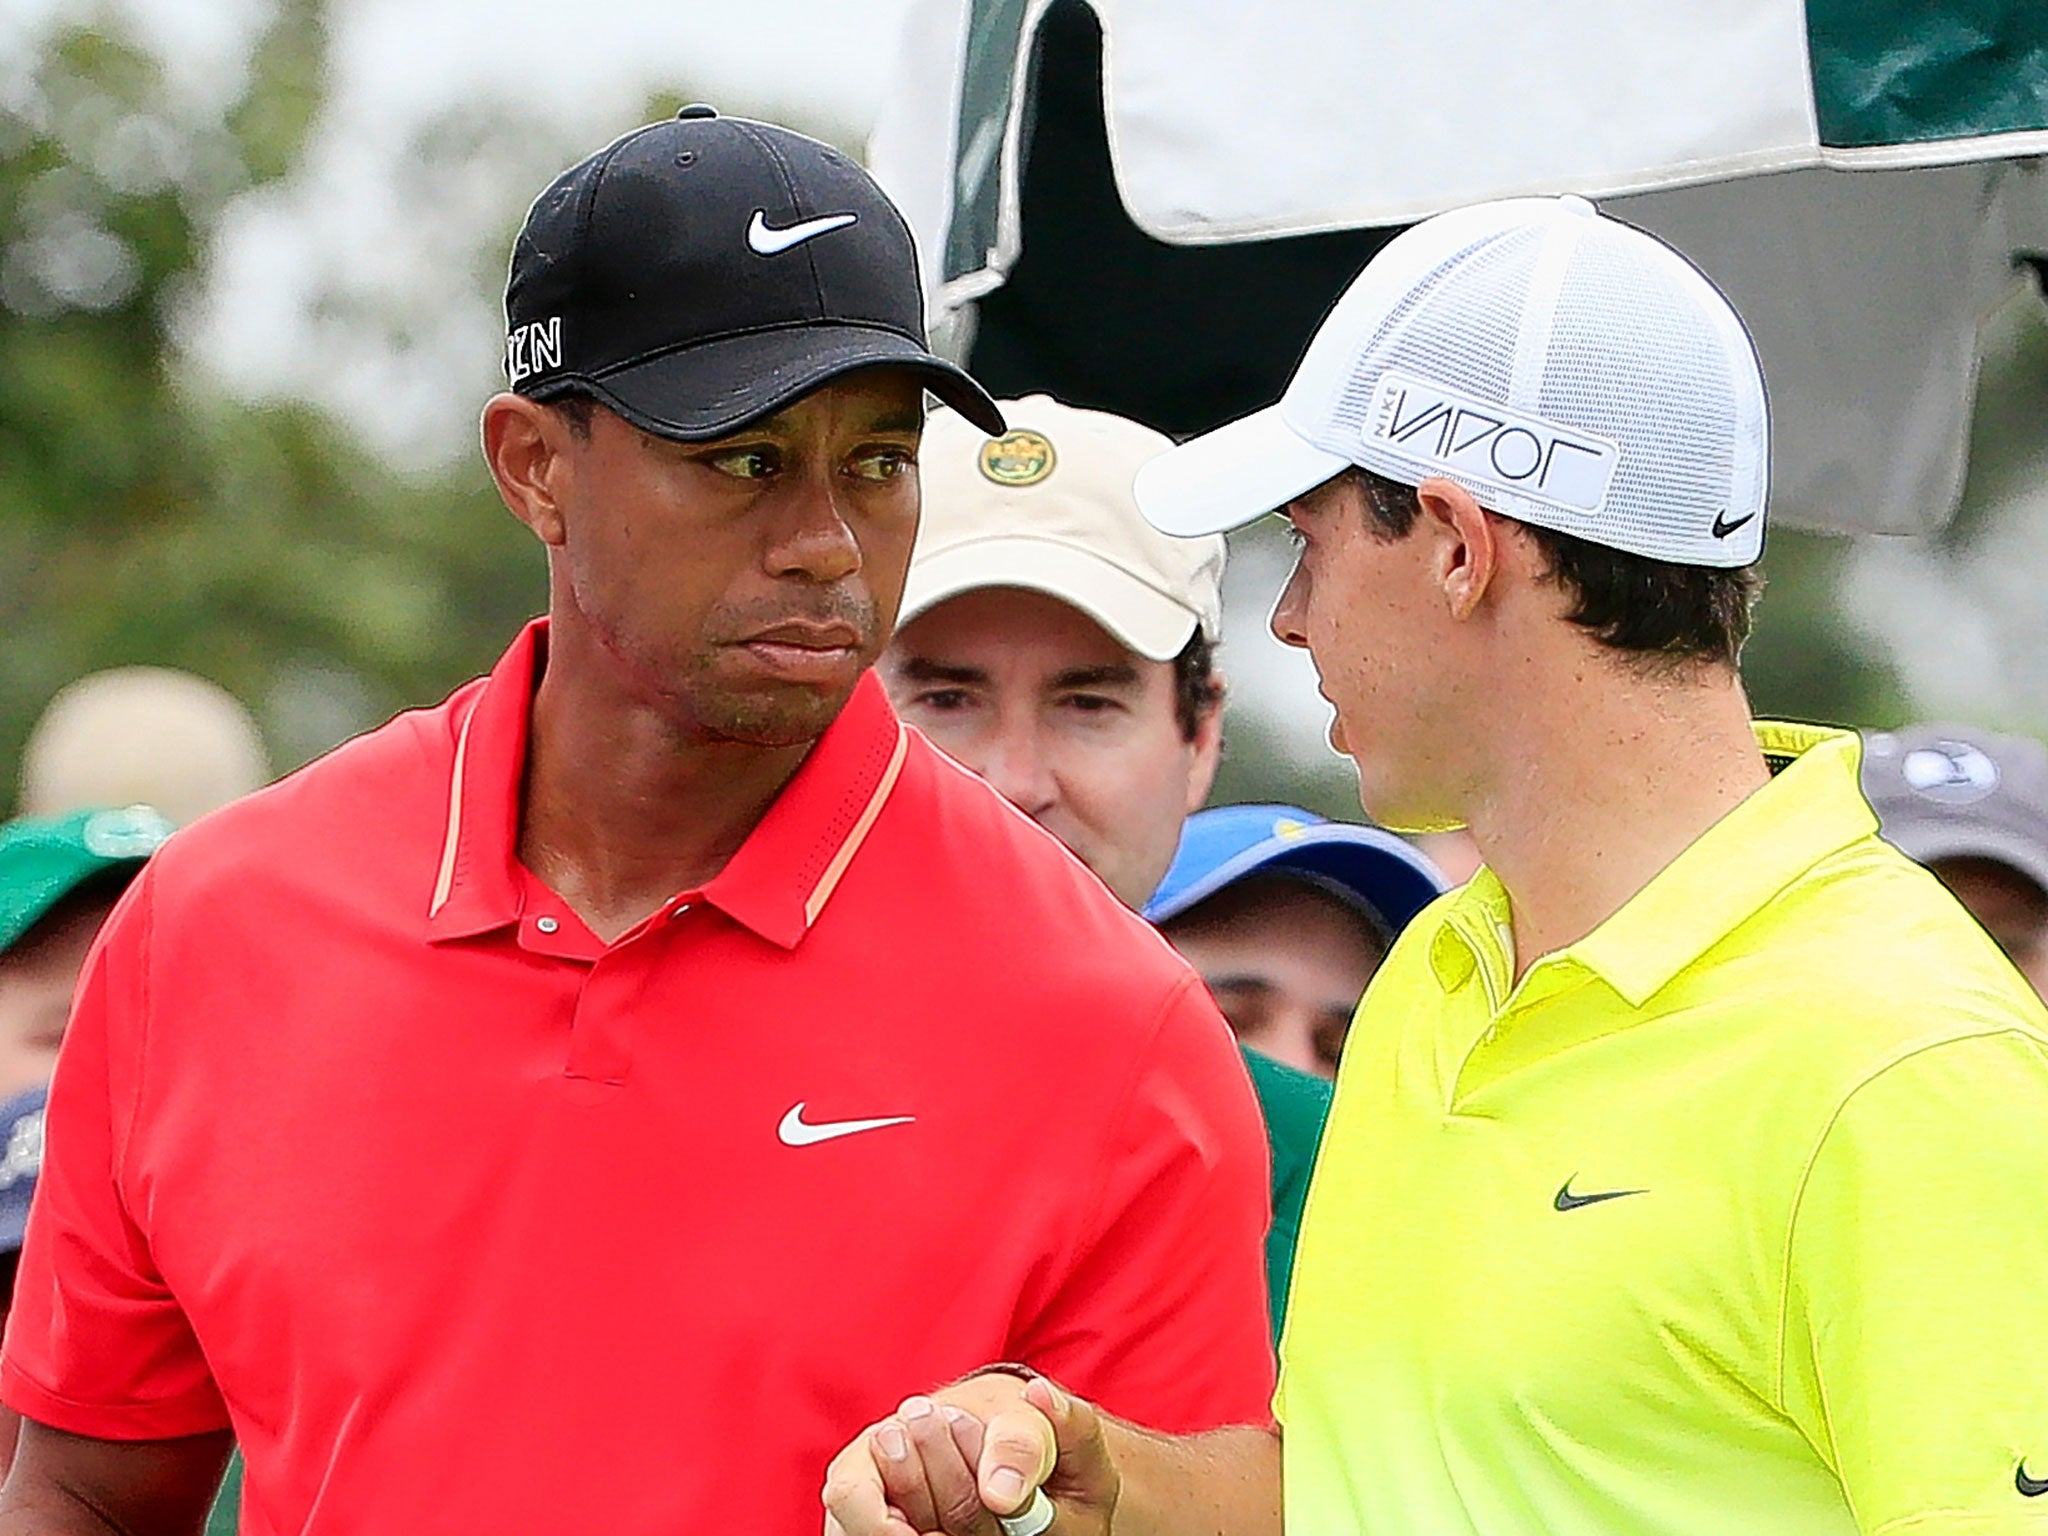 Tiger Woods and Rory McIlroy shake hands as they wait on the first tee before the final round at Augusta